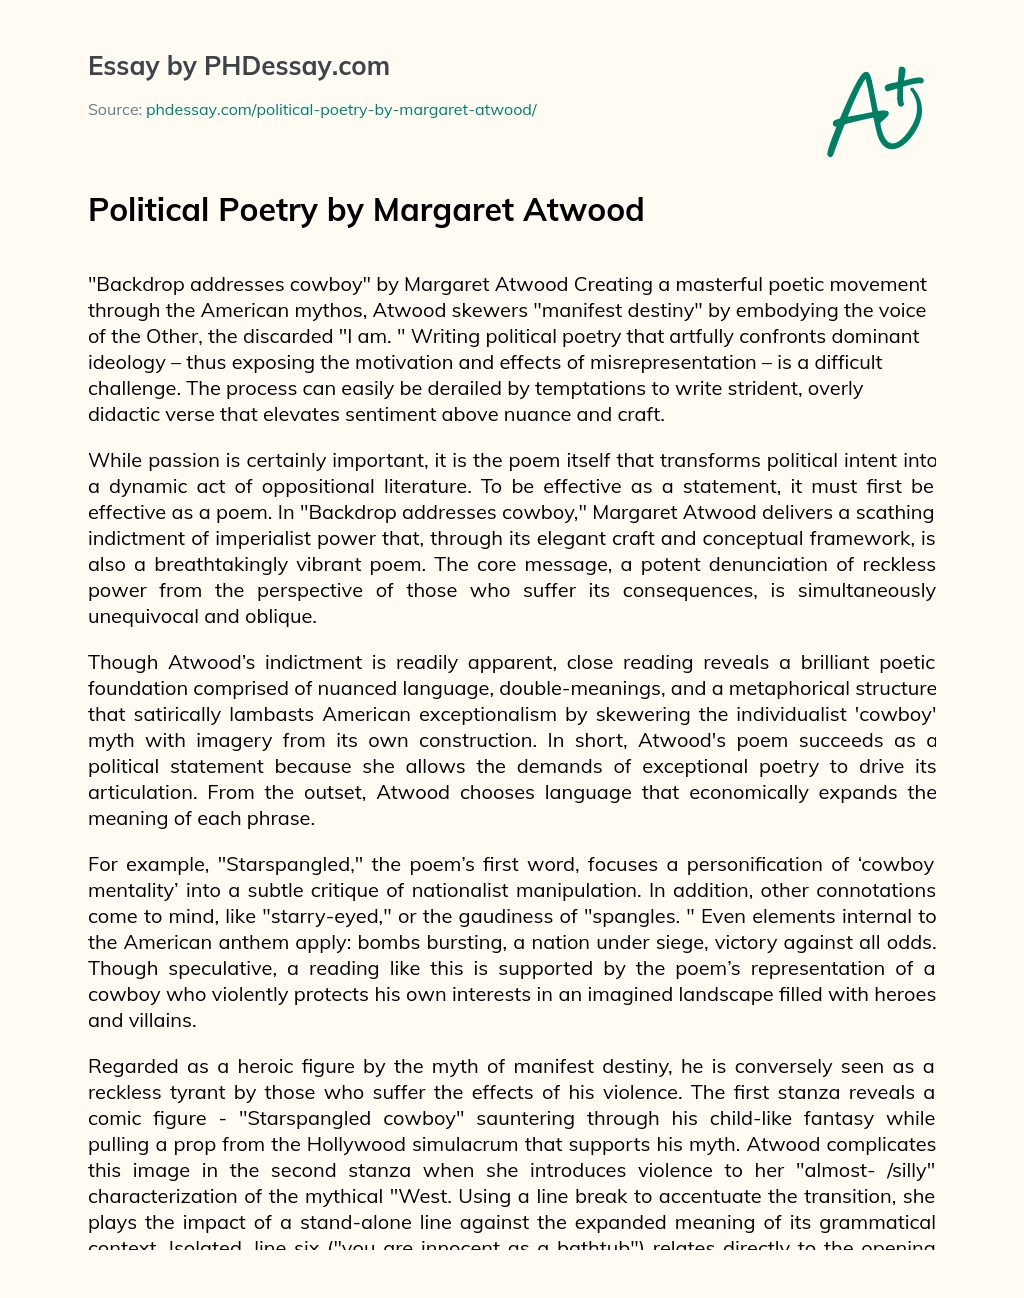 Political Poetry by Margaret Atwood essay